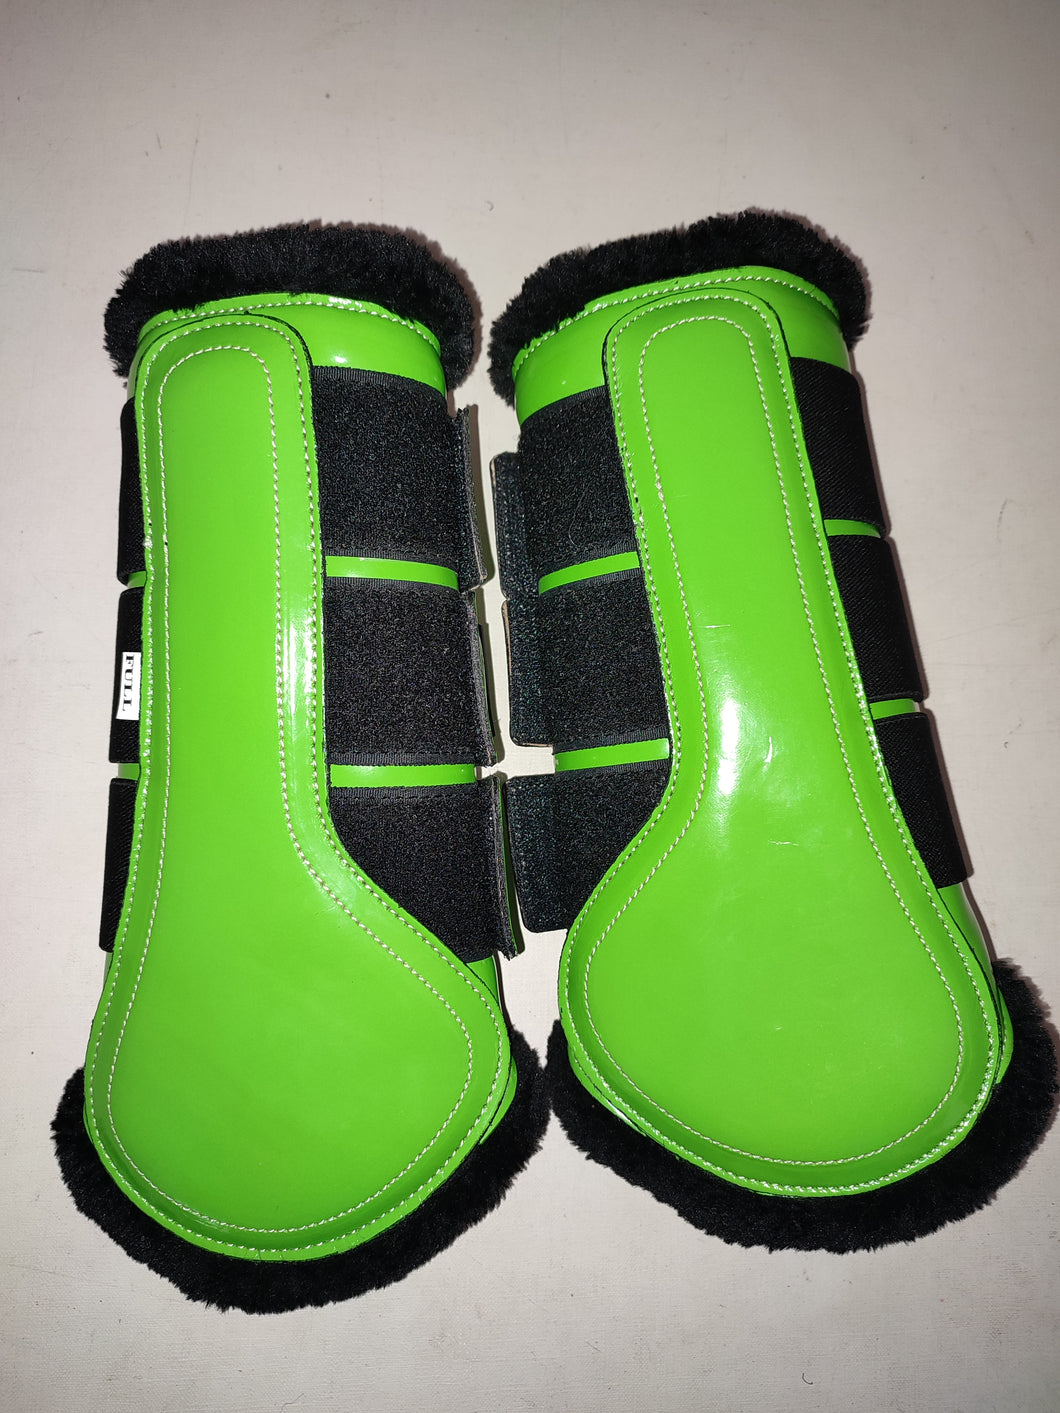 CLEARANCE SALE! Brushing Boots LIME Black Fleece